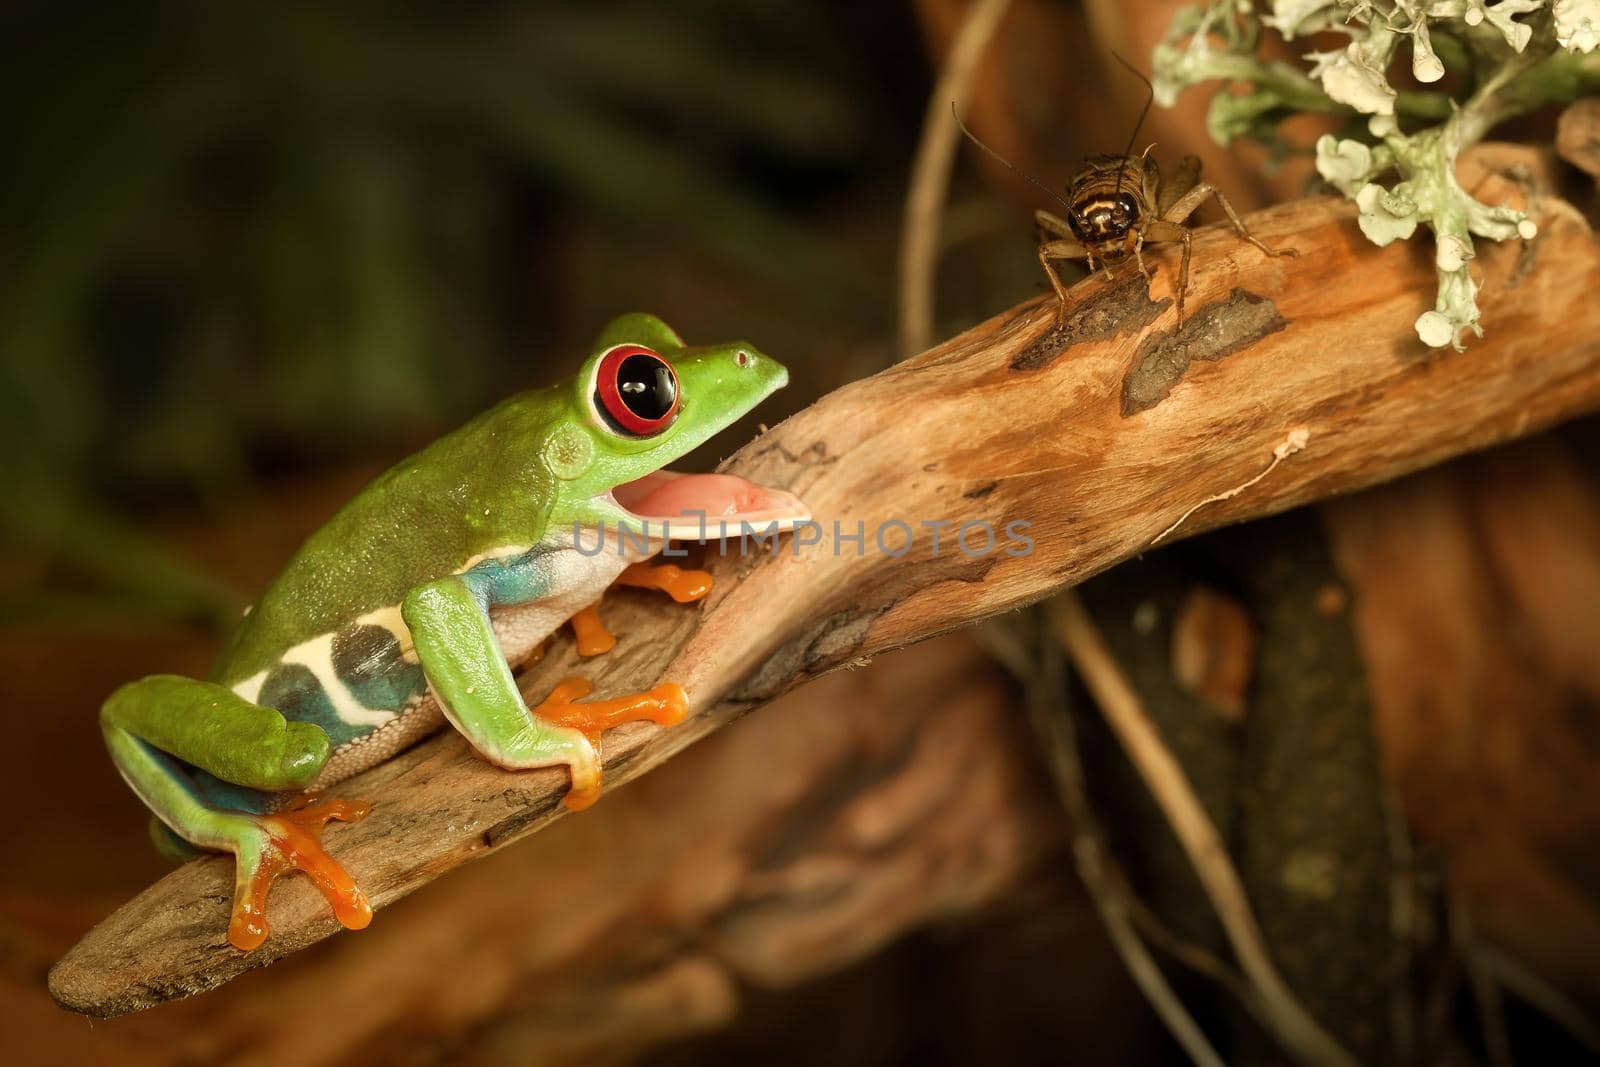 Red-eye frog and cricket by Lincikas